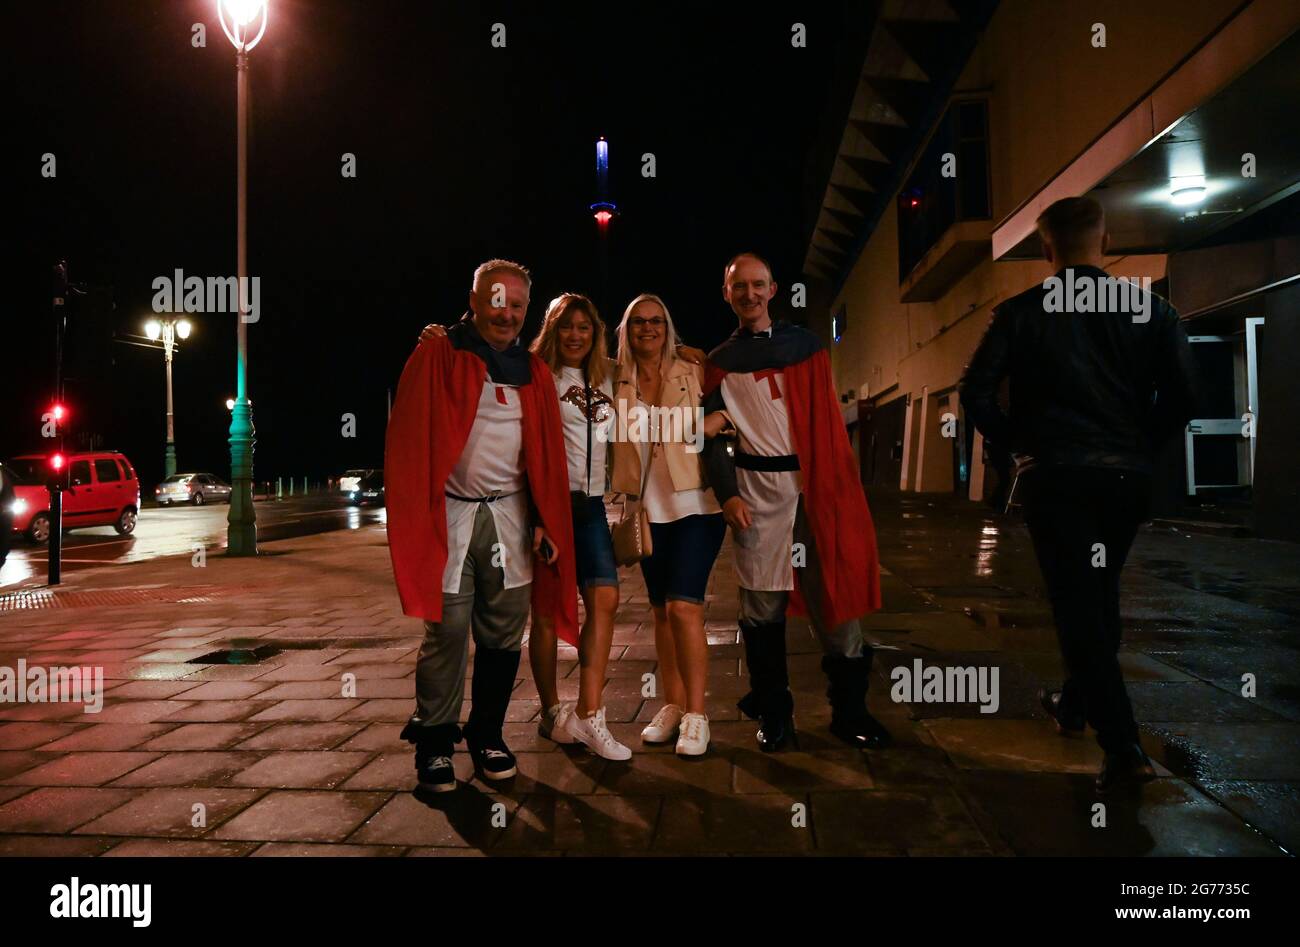 Brighton UK 11th July 2021 - England football fans still smiling as they head home in Brighton after watching the defeat on penalties to Italy in the EURO 2020 final  : Credit Simon Dack / Alamy Live News Stock Photo